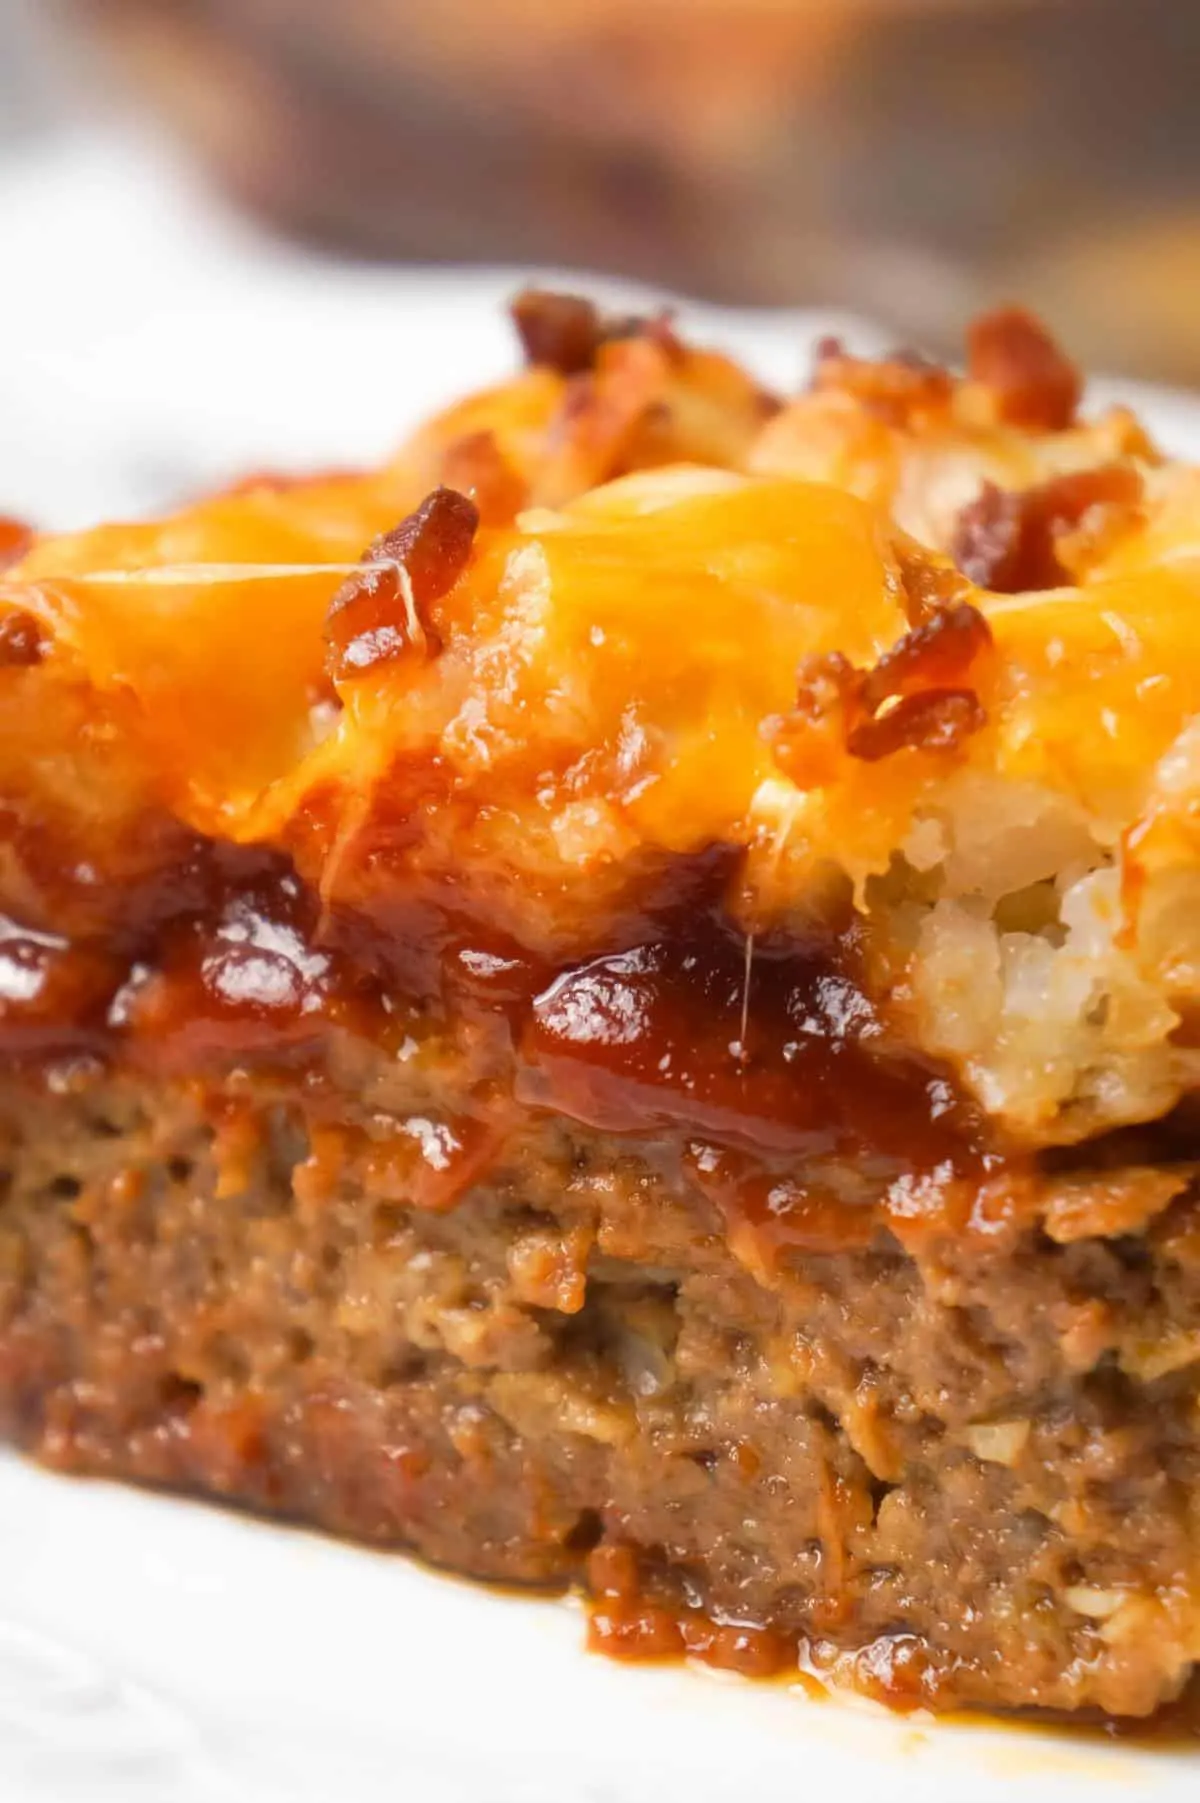 Cheesy Tater Tot Meatloaf Casserole is an easy ground beef dinner recipe with a meatloaf base, topped with a ketchup and bbq sauce glaze, tater tots, shredded cheese and crumbled bacon.